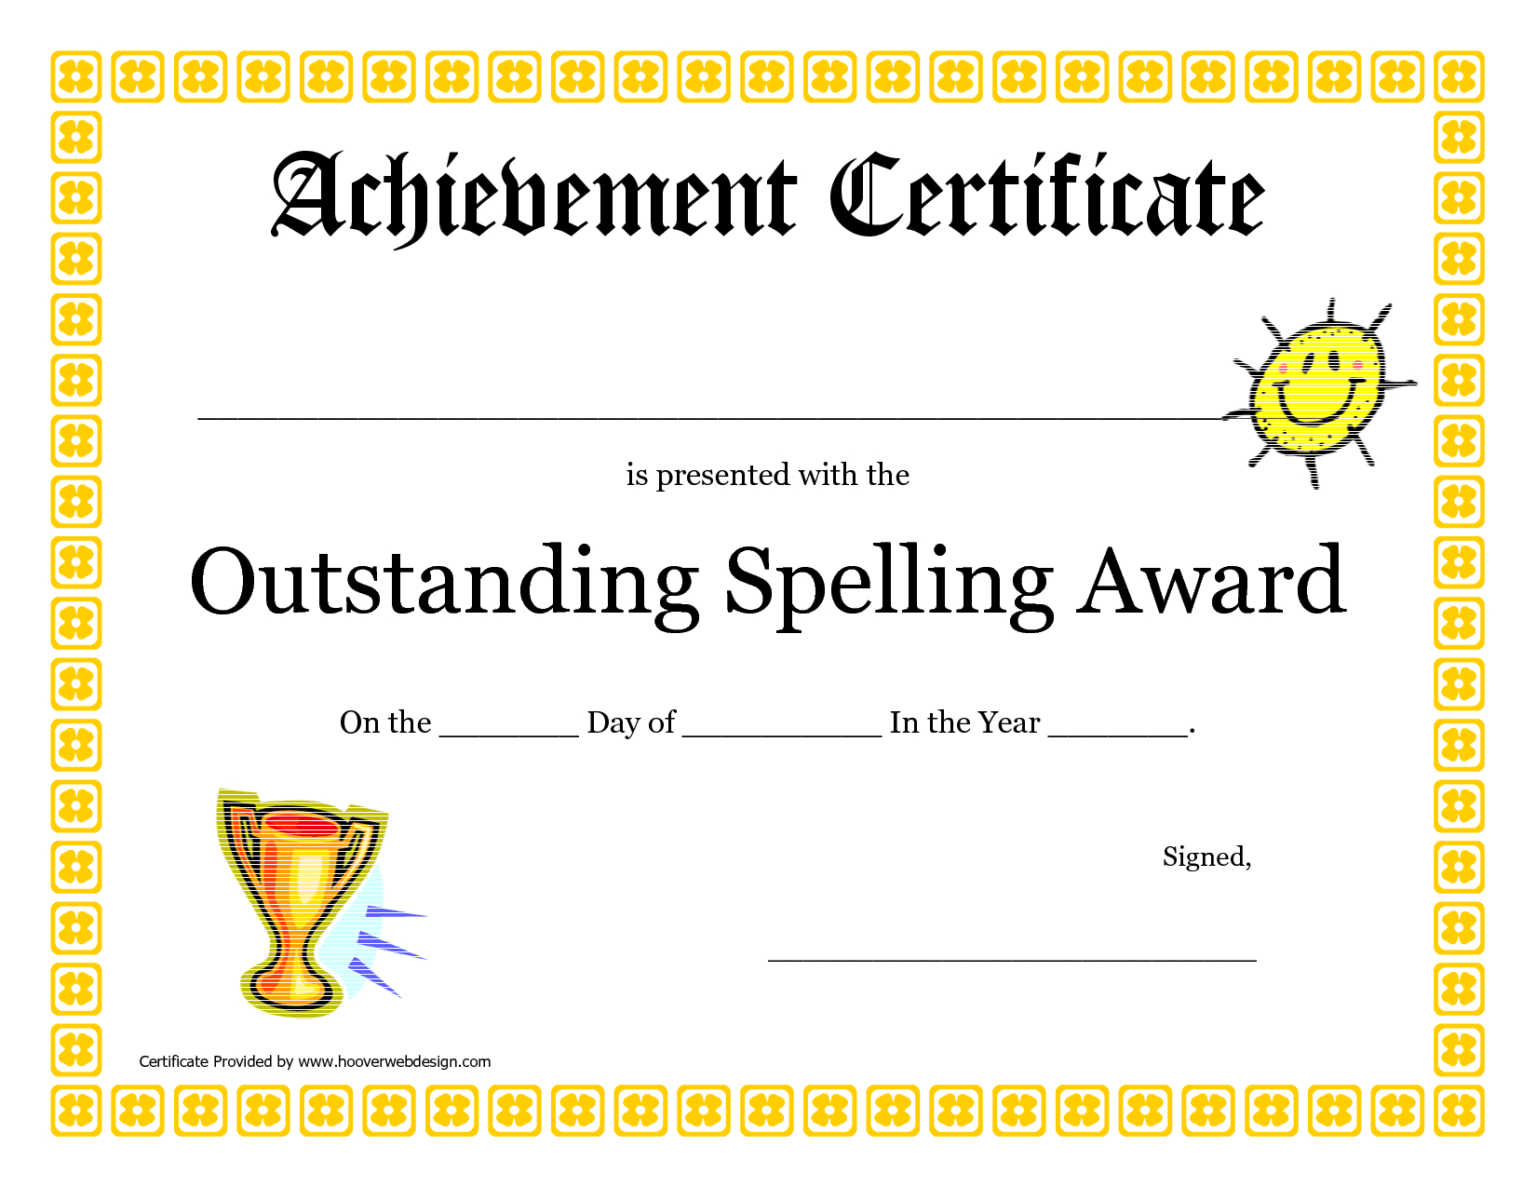 Outstanding Spelling Award Printable Certificate Pdf Picture Throughout